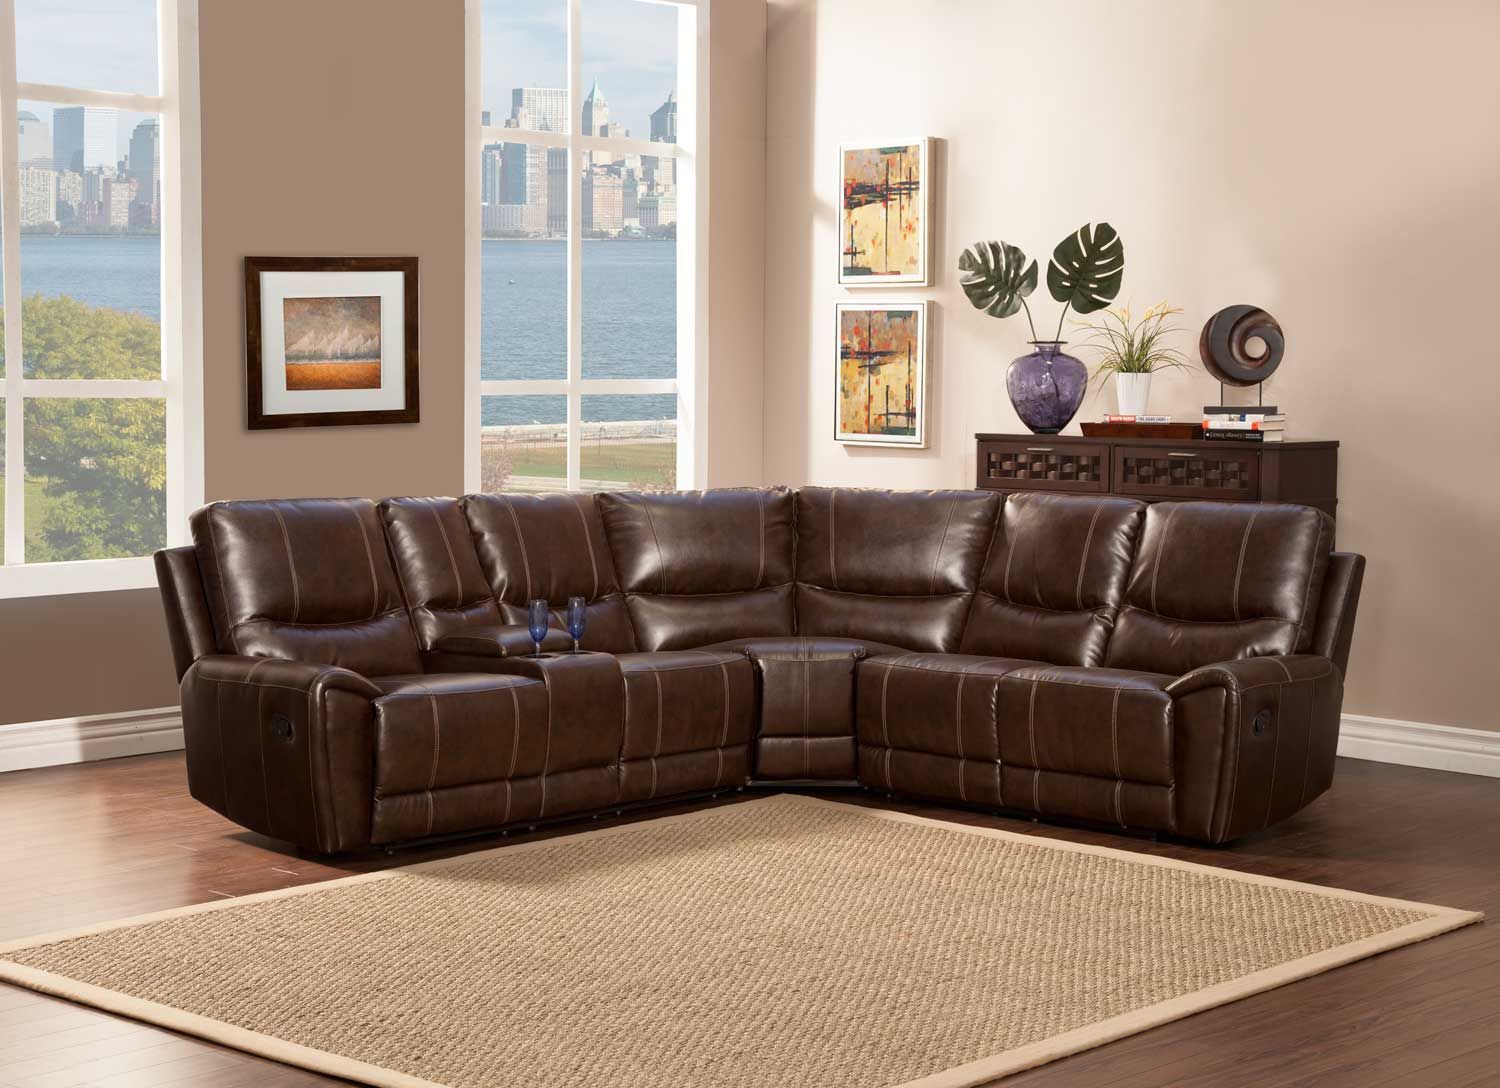 Gerald 4pc Sectional Set | Sectional | Dallas Tx Furniture In 4pc Beckett Contemporary Sectional Sofas And Ottoman Sets (View 7 of 15)